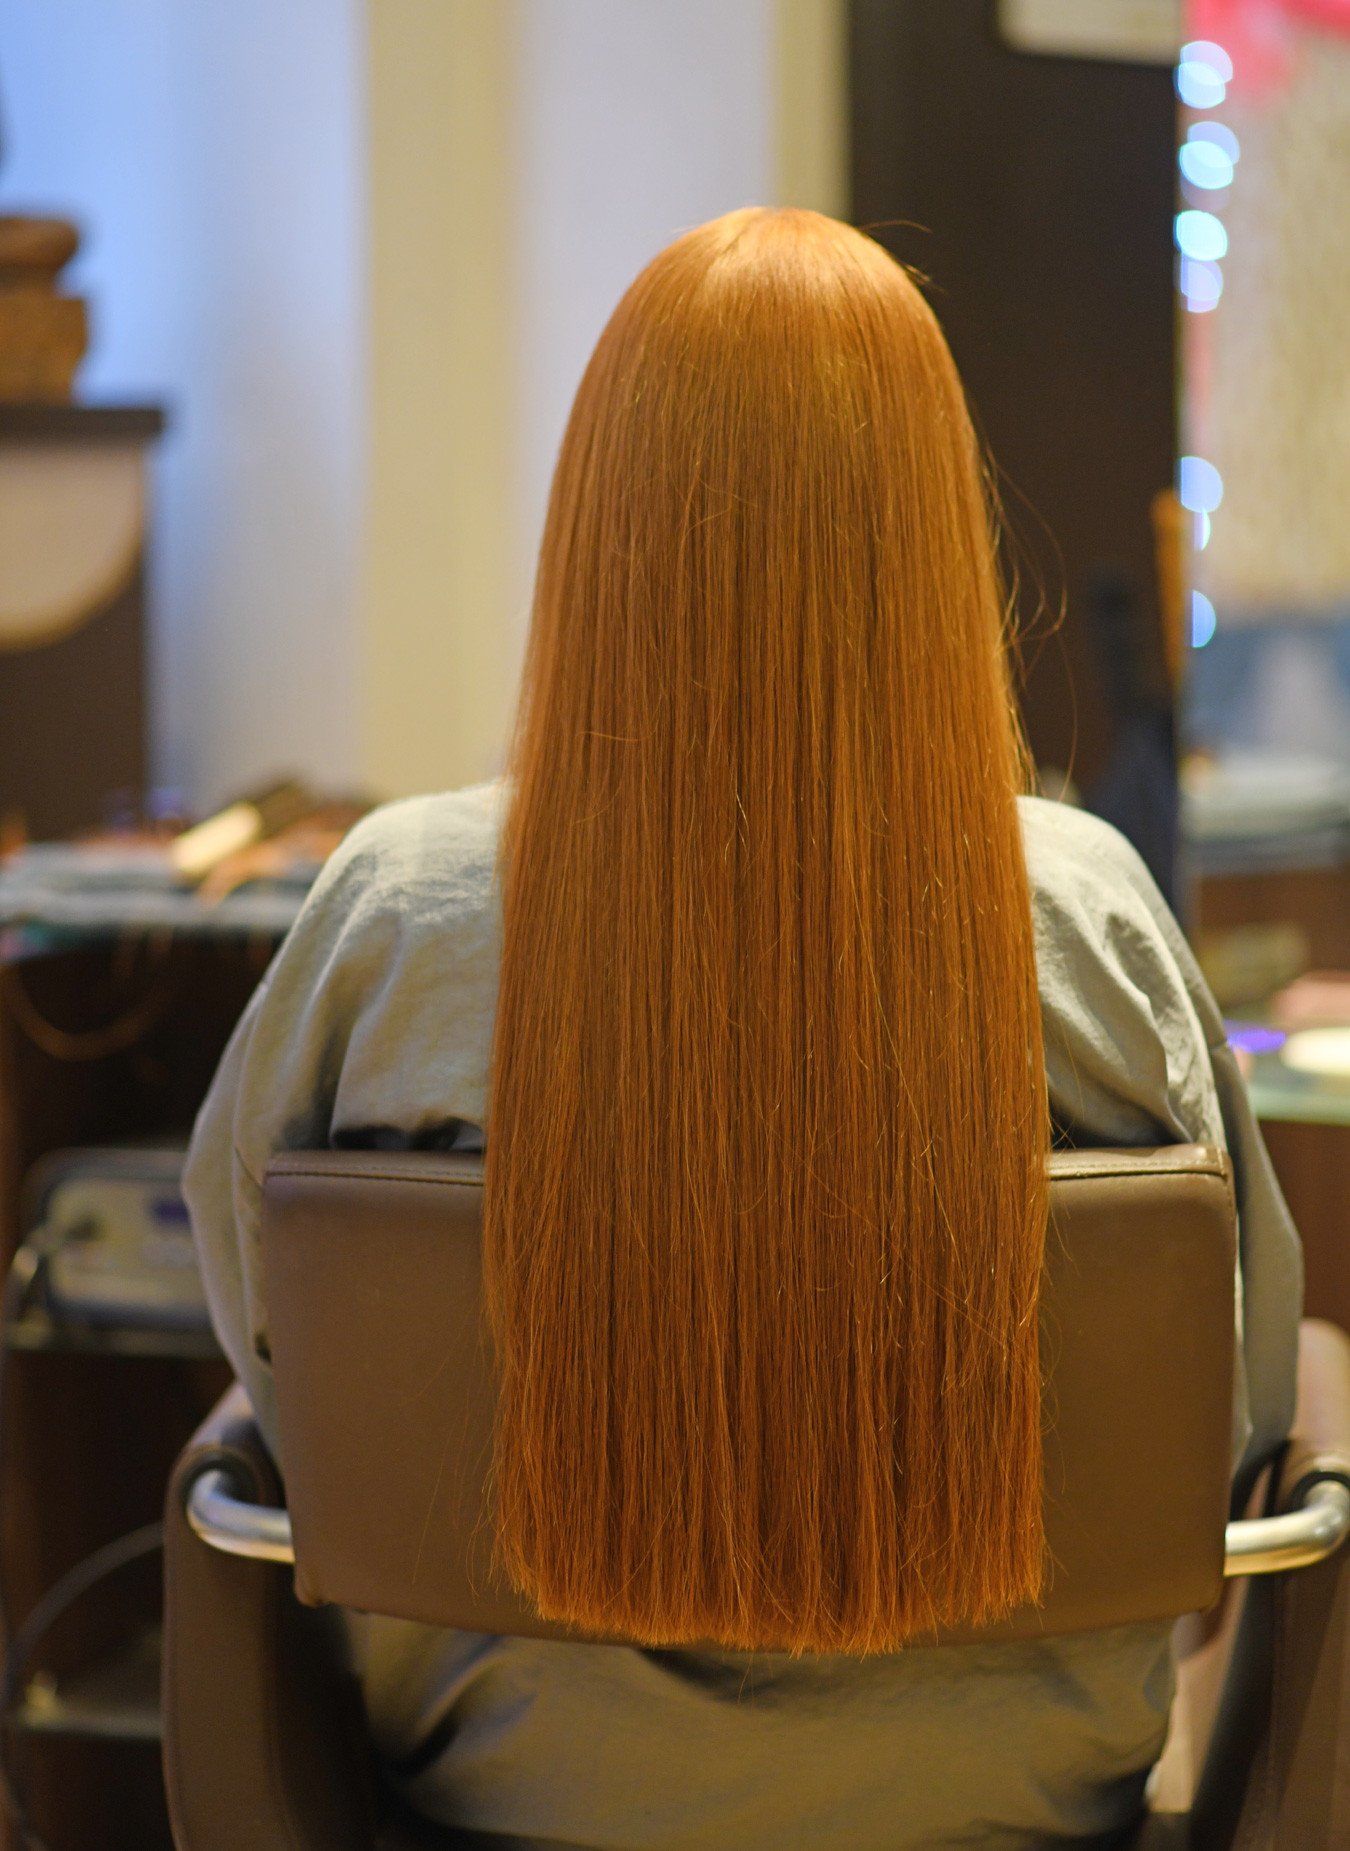 Great Lengths hair extensions for red hair - half head of 20" extensions